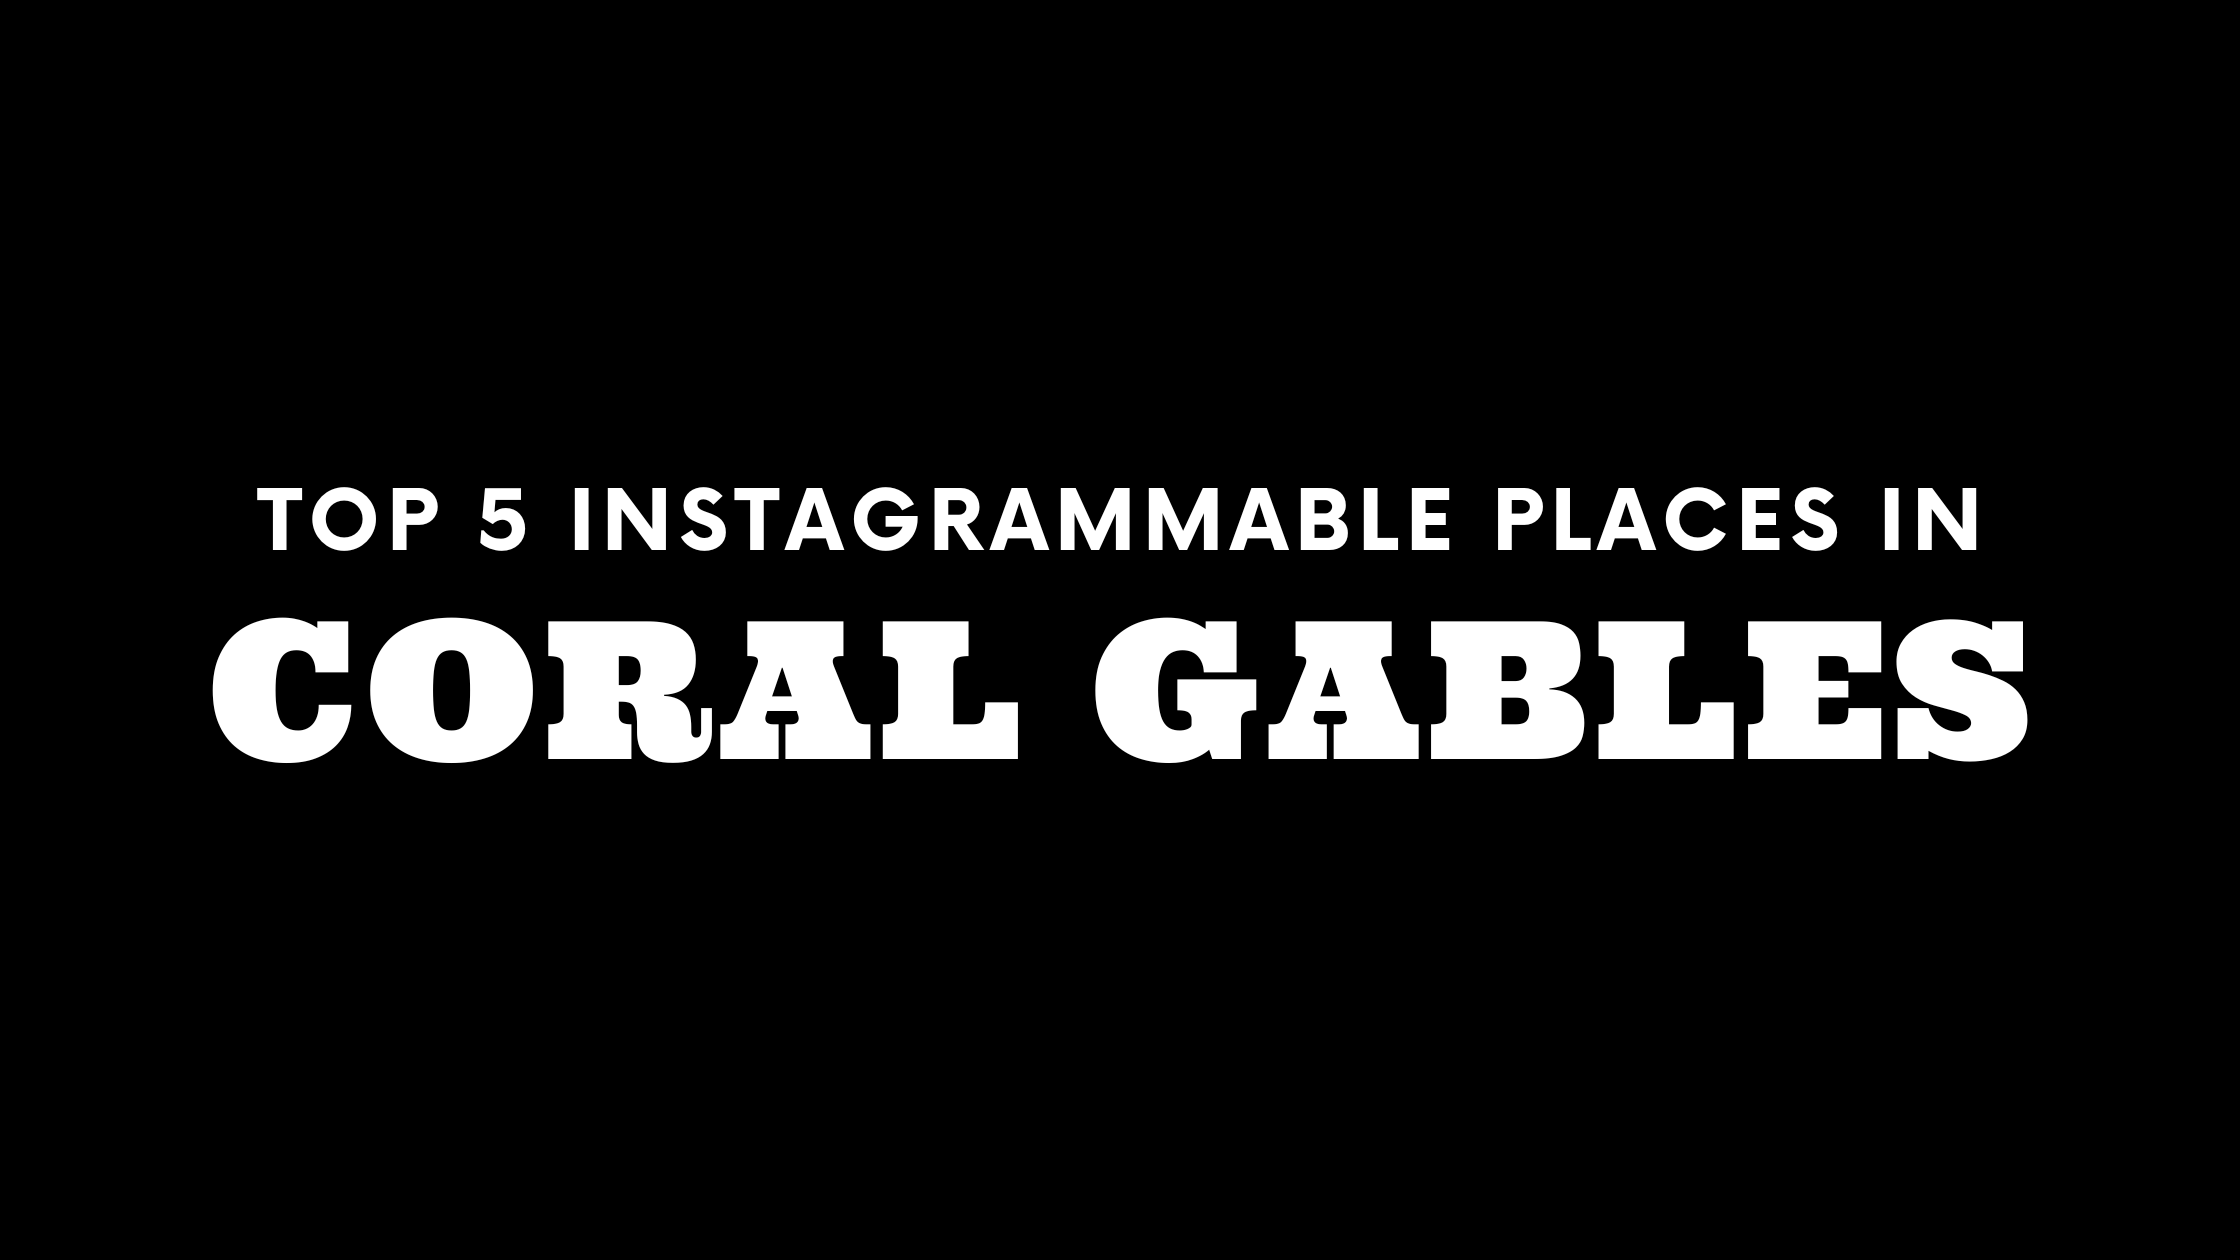 Top 5 Instagrammable Places in Coral Gables